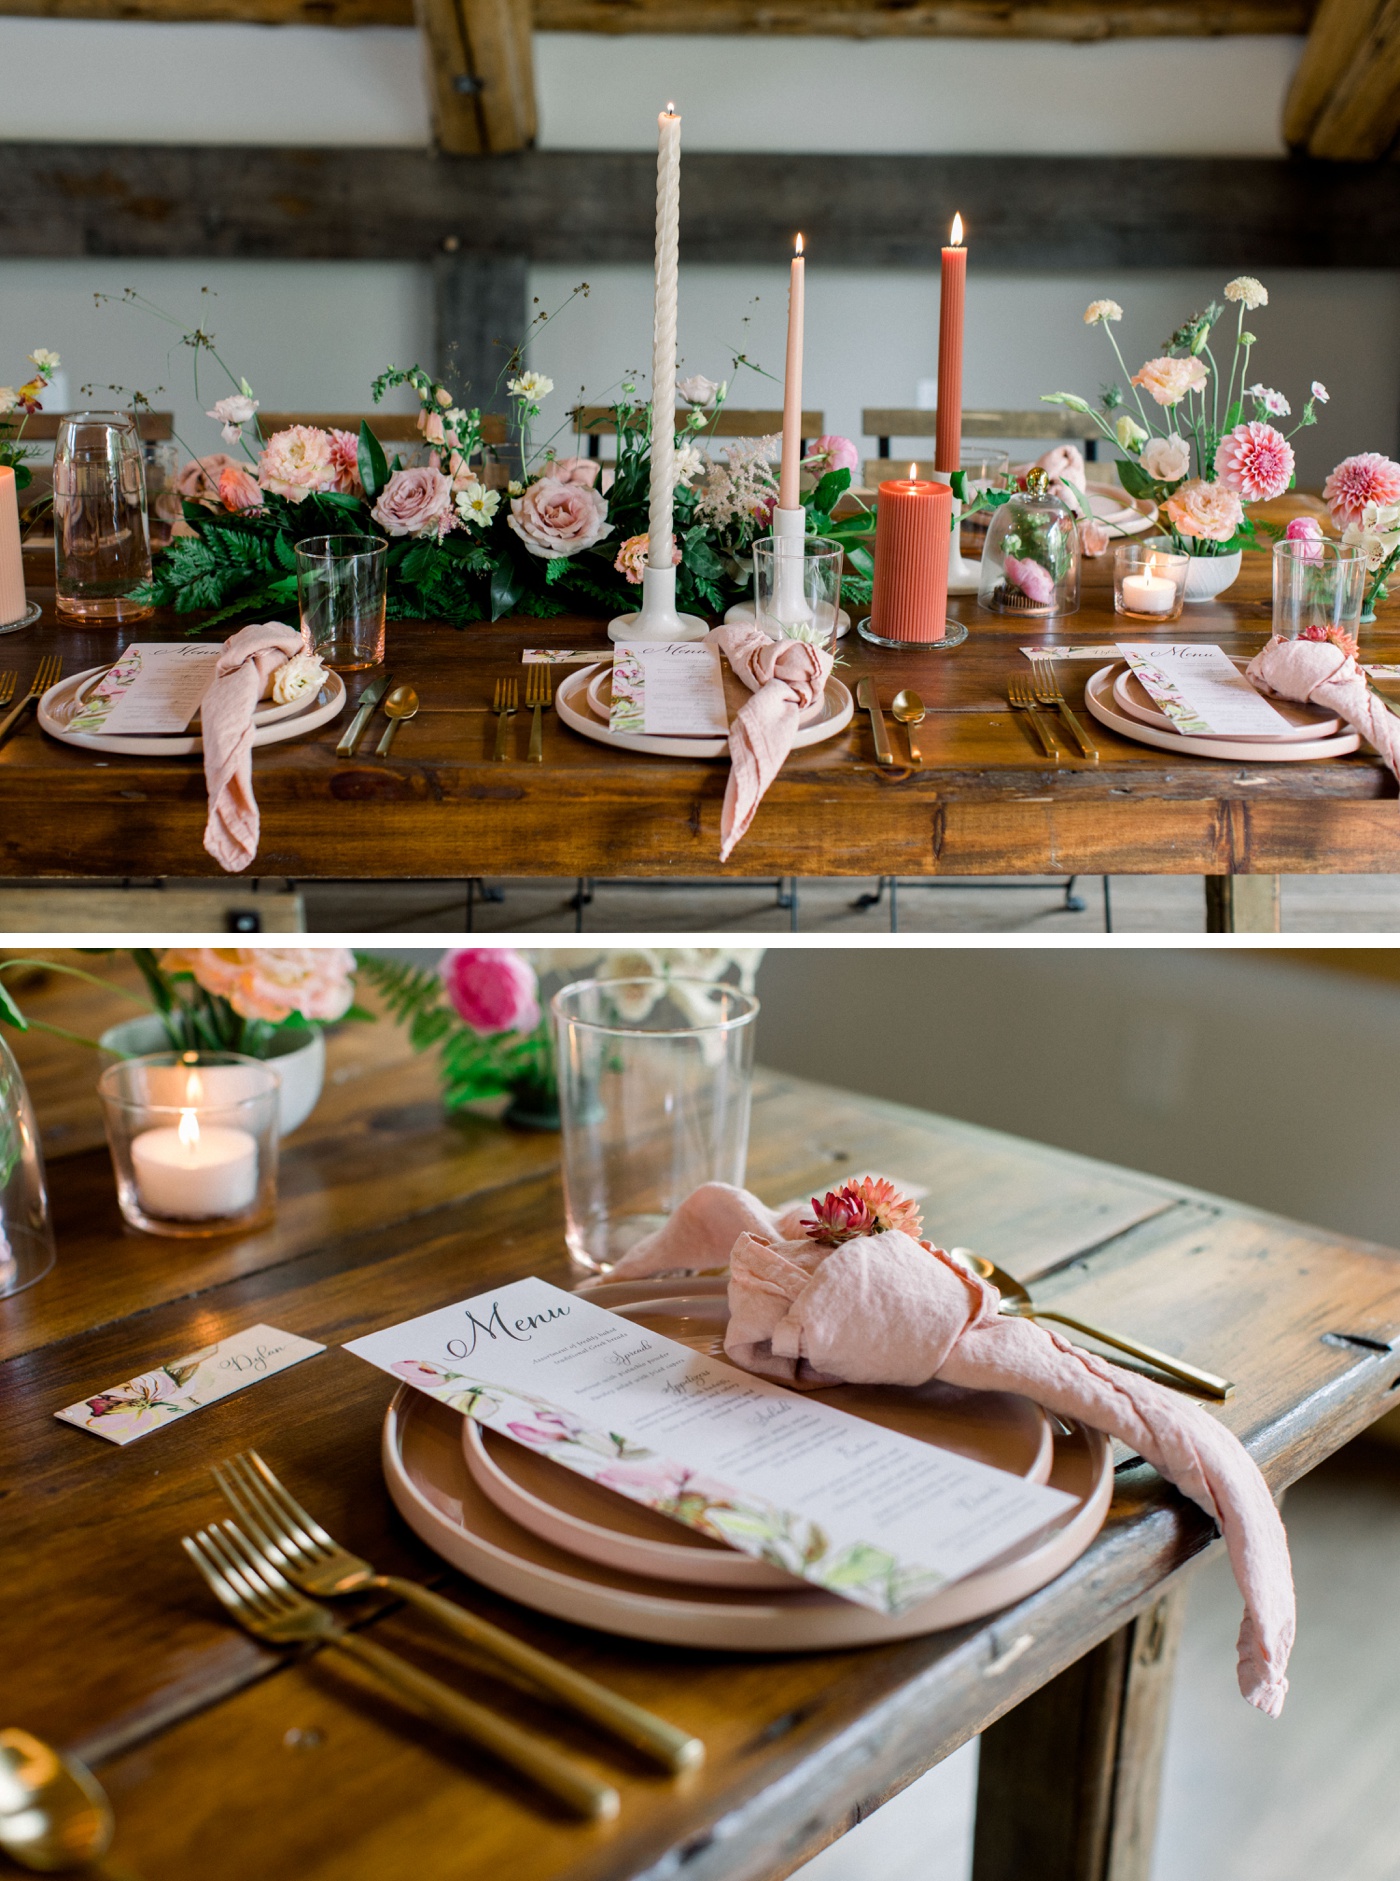 Styled shoot photography by Kate Preftakes